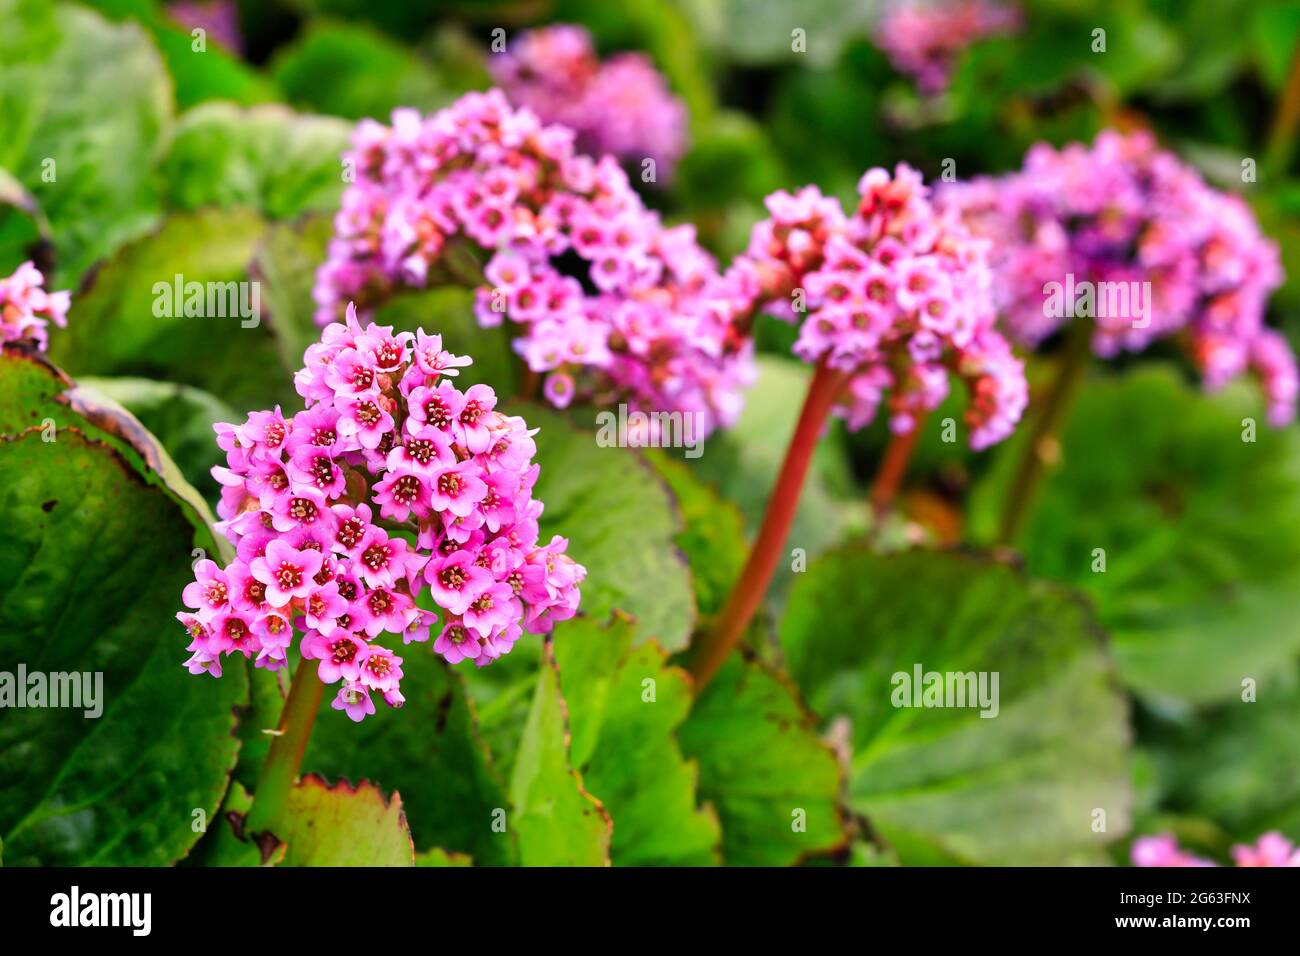 Pink flowers of Bergenia cordifolia, Heartleaf Bergenia, growing in the garden in the spring. Bergenia is an evergreen perennial plant. Stock Photo